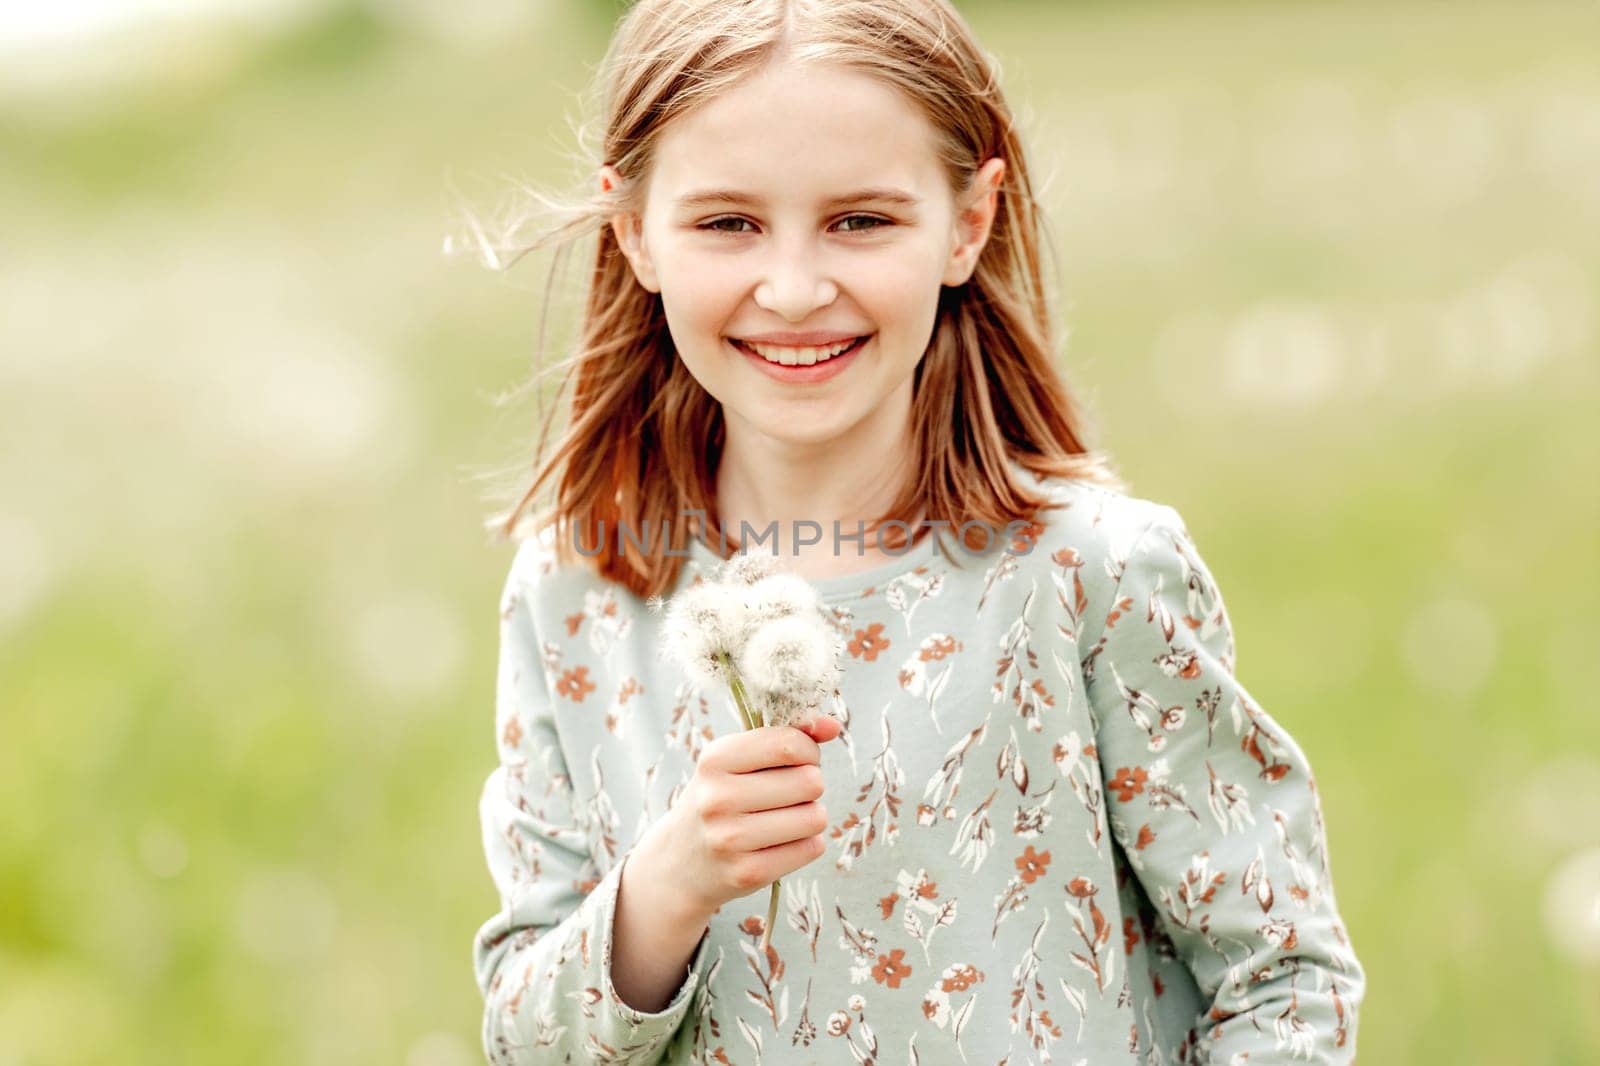 Little girl holding blowballs flower in hands in blossom field and smiling. Cute child kid with dandelions at nature outdoors portrait